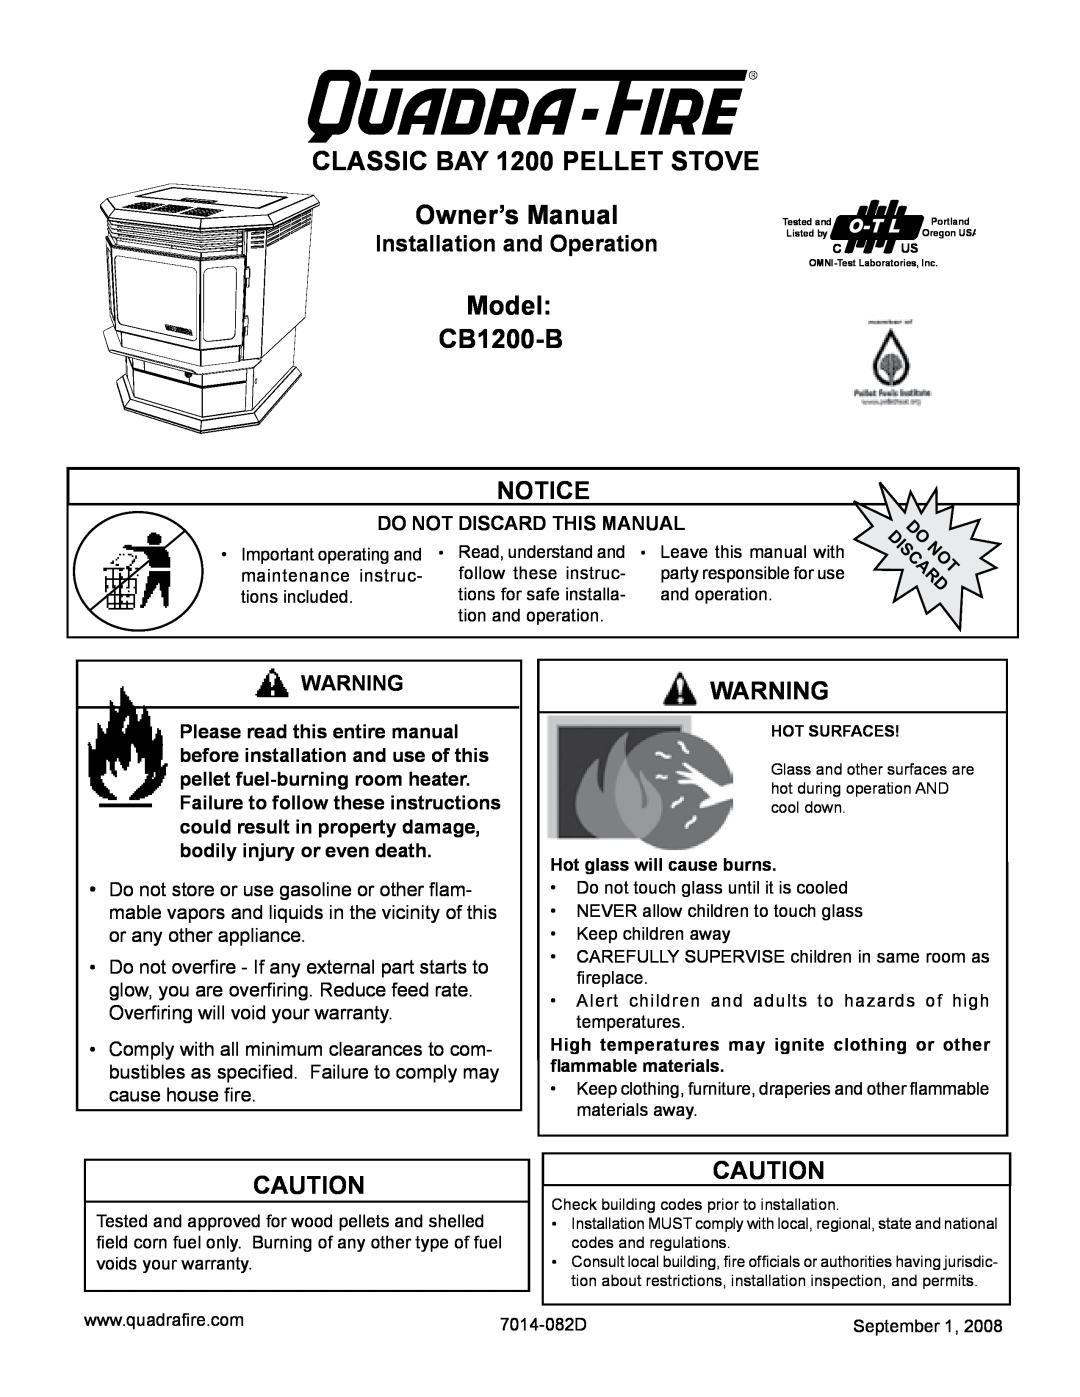 Quadra-Fire owner manual Model CB1200-B, Installation and Operation, Do Not Discard This Manual 